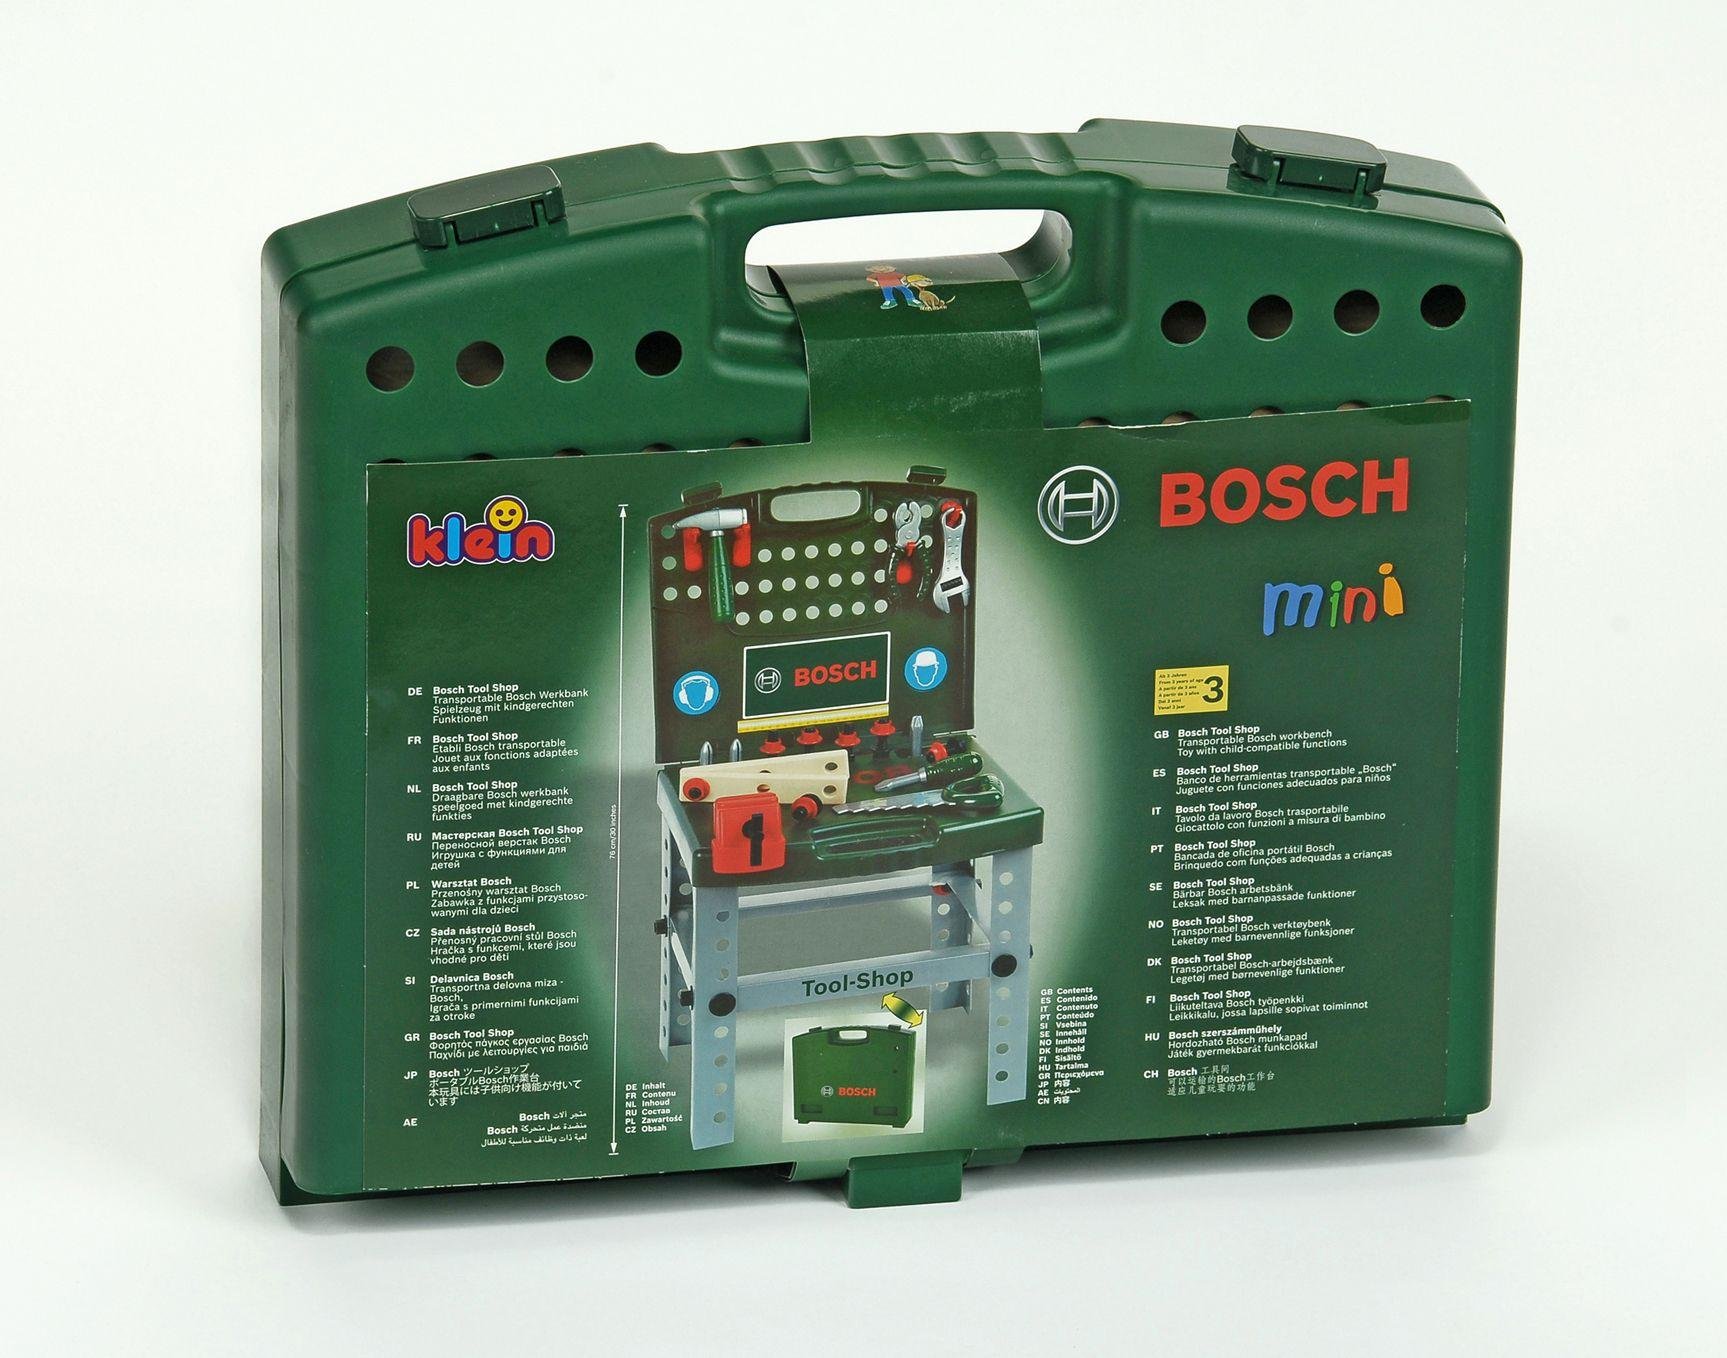 Bosch Toy Tool Shop Workbench with Accessories.